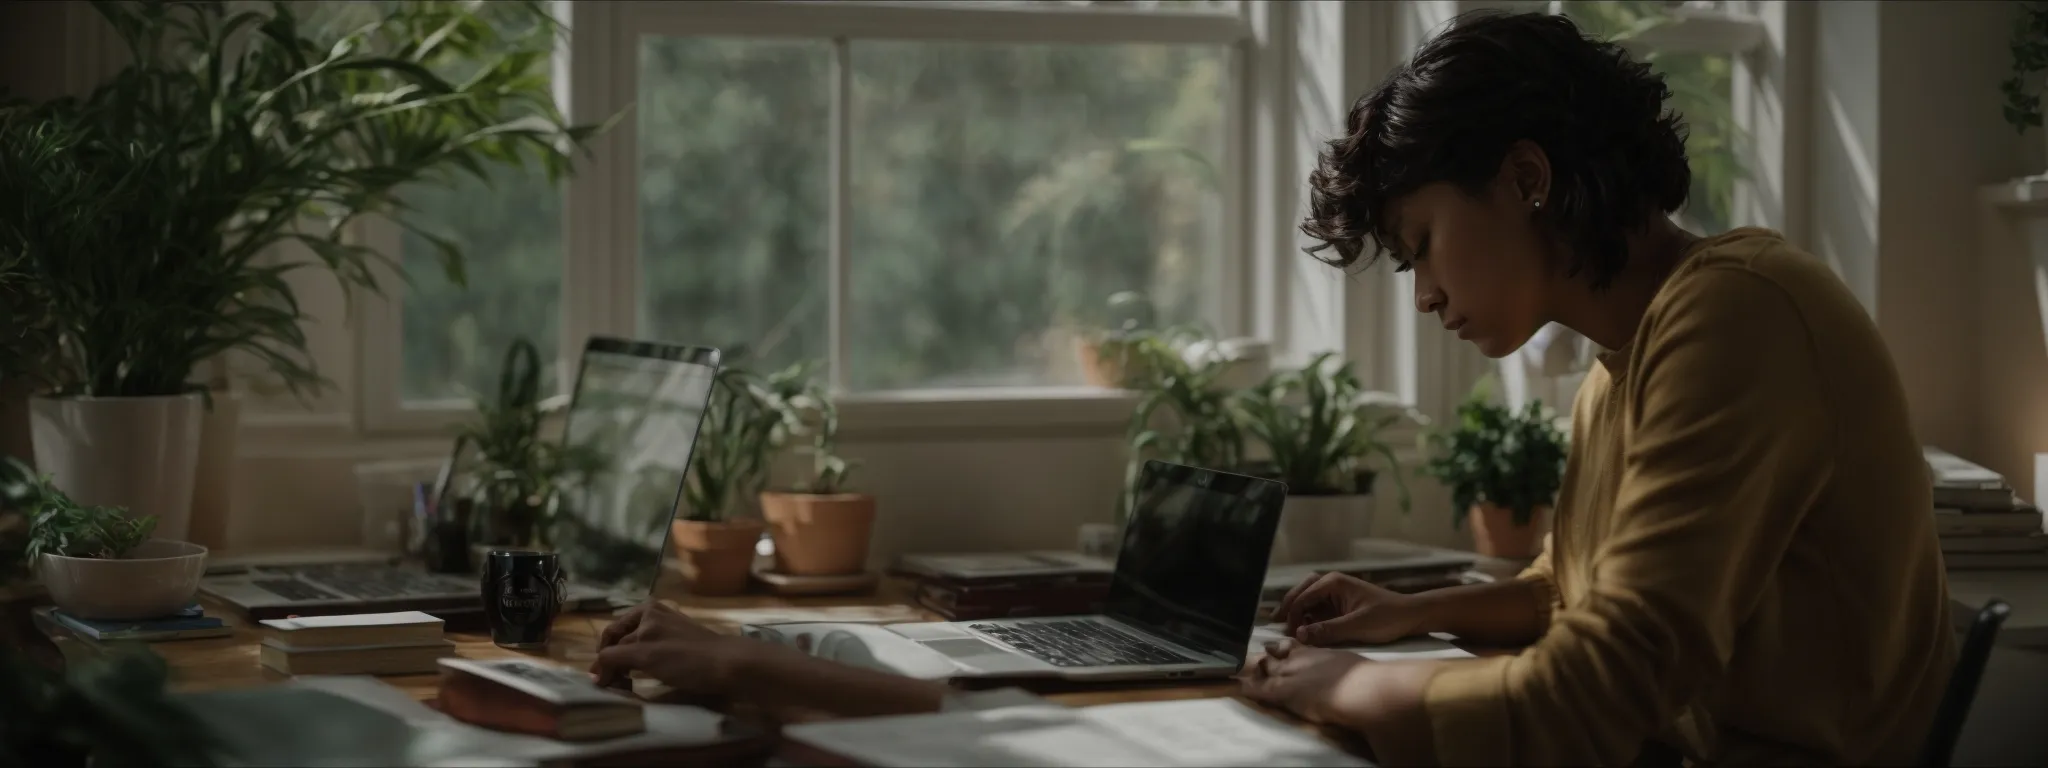 a person typing on a laptop in a well-lit home office surrounded by books and a potted plant.